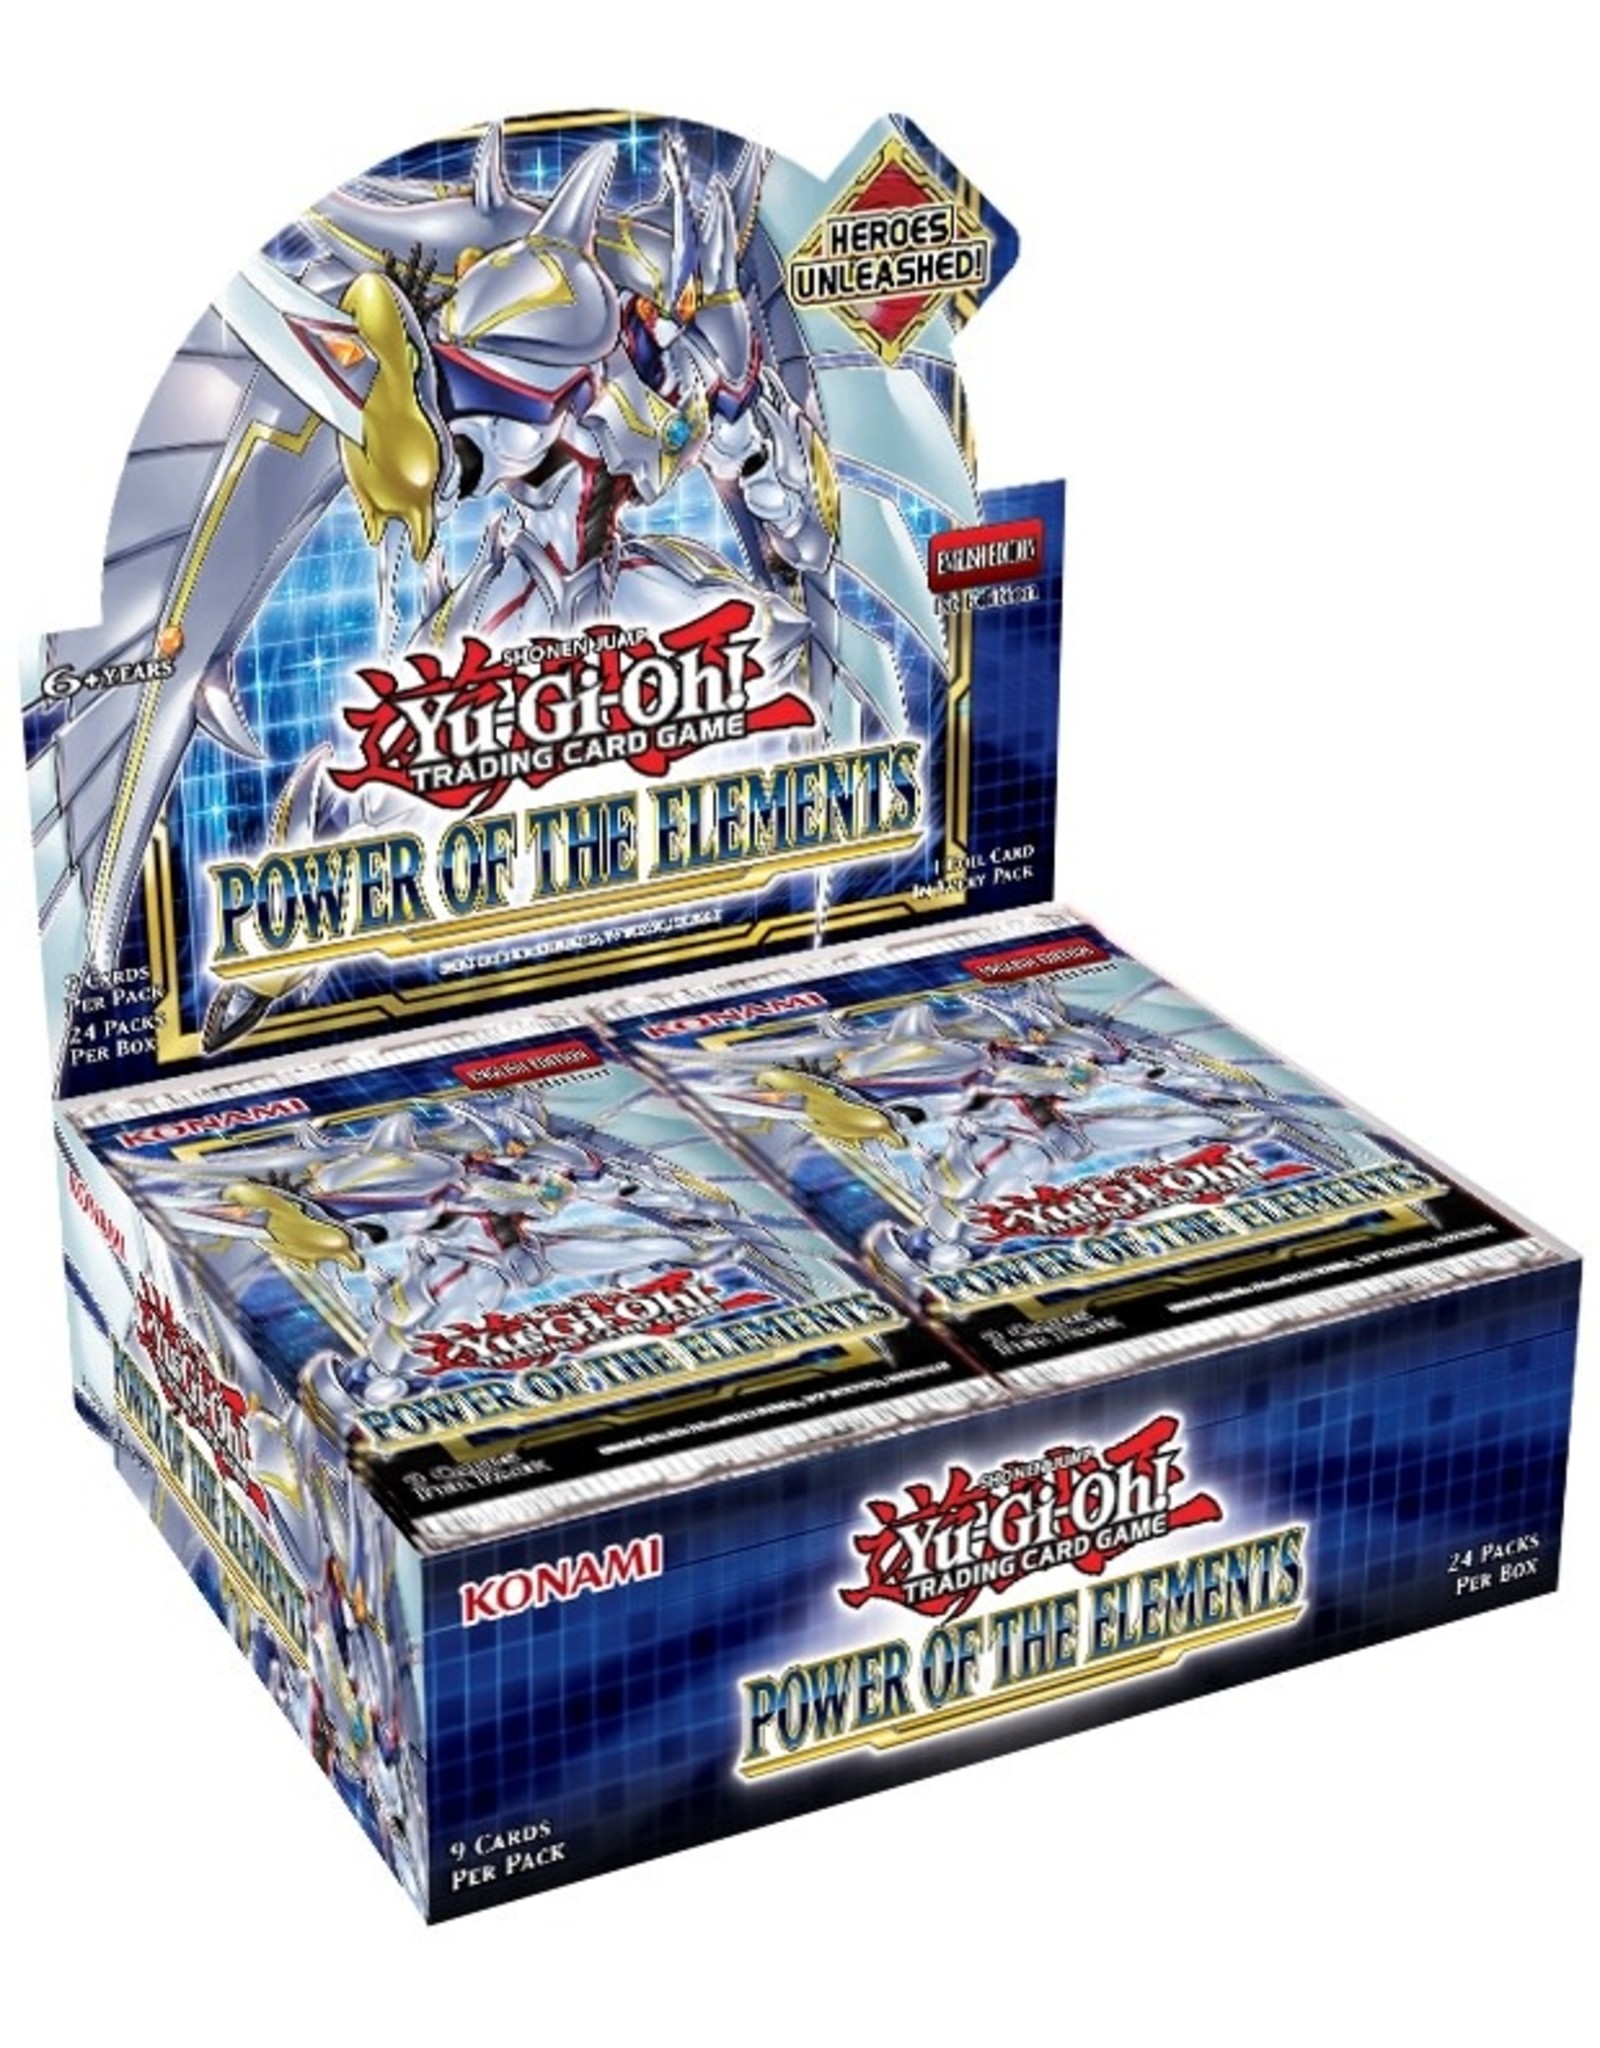 Konami Power of The Elements Booster Pack